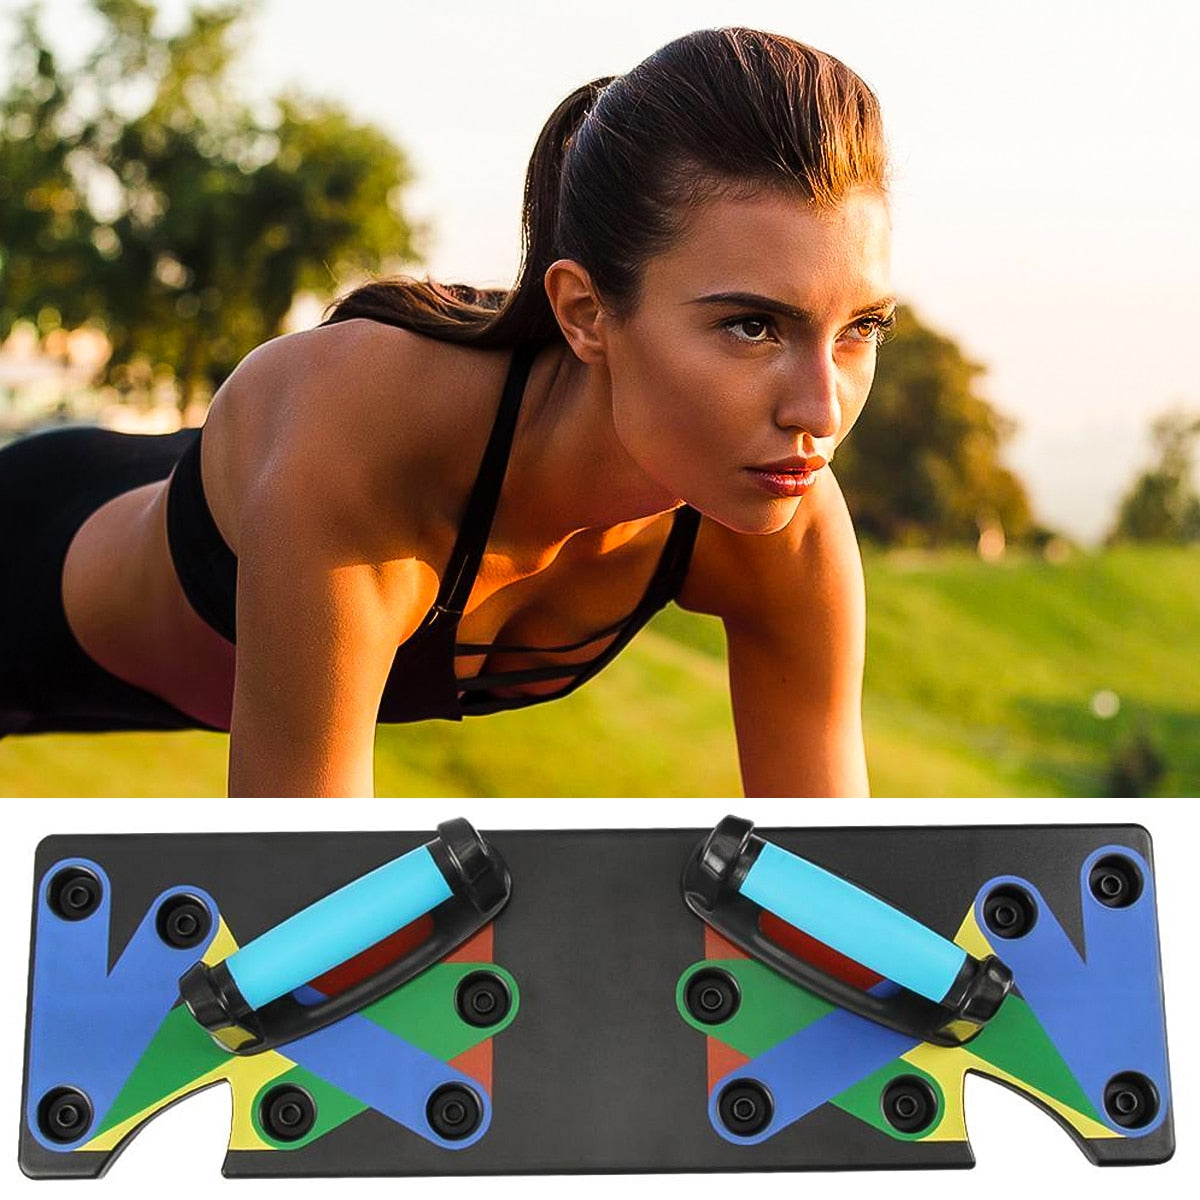 9 In 1 Push Up Rack Board Men Women Comprehensive Fitness Exercise Push Up Stands Body Building Training System Home Equipment|Push-Ups Stands|